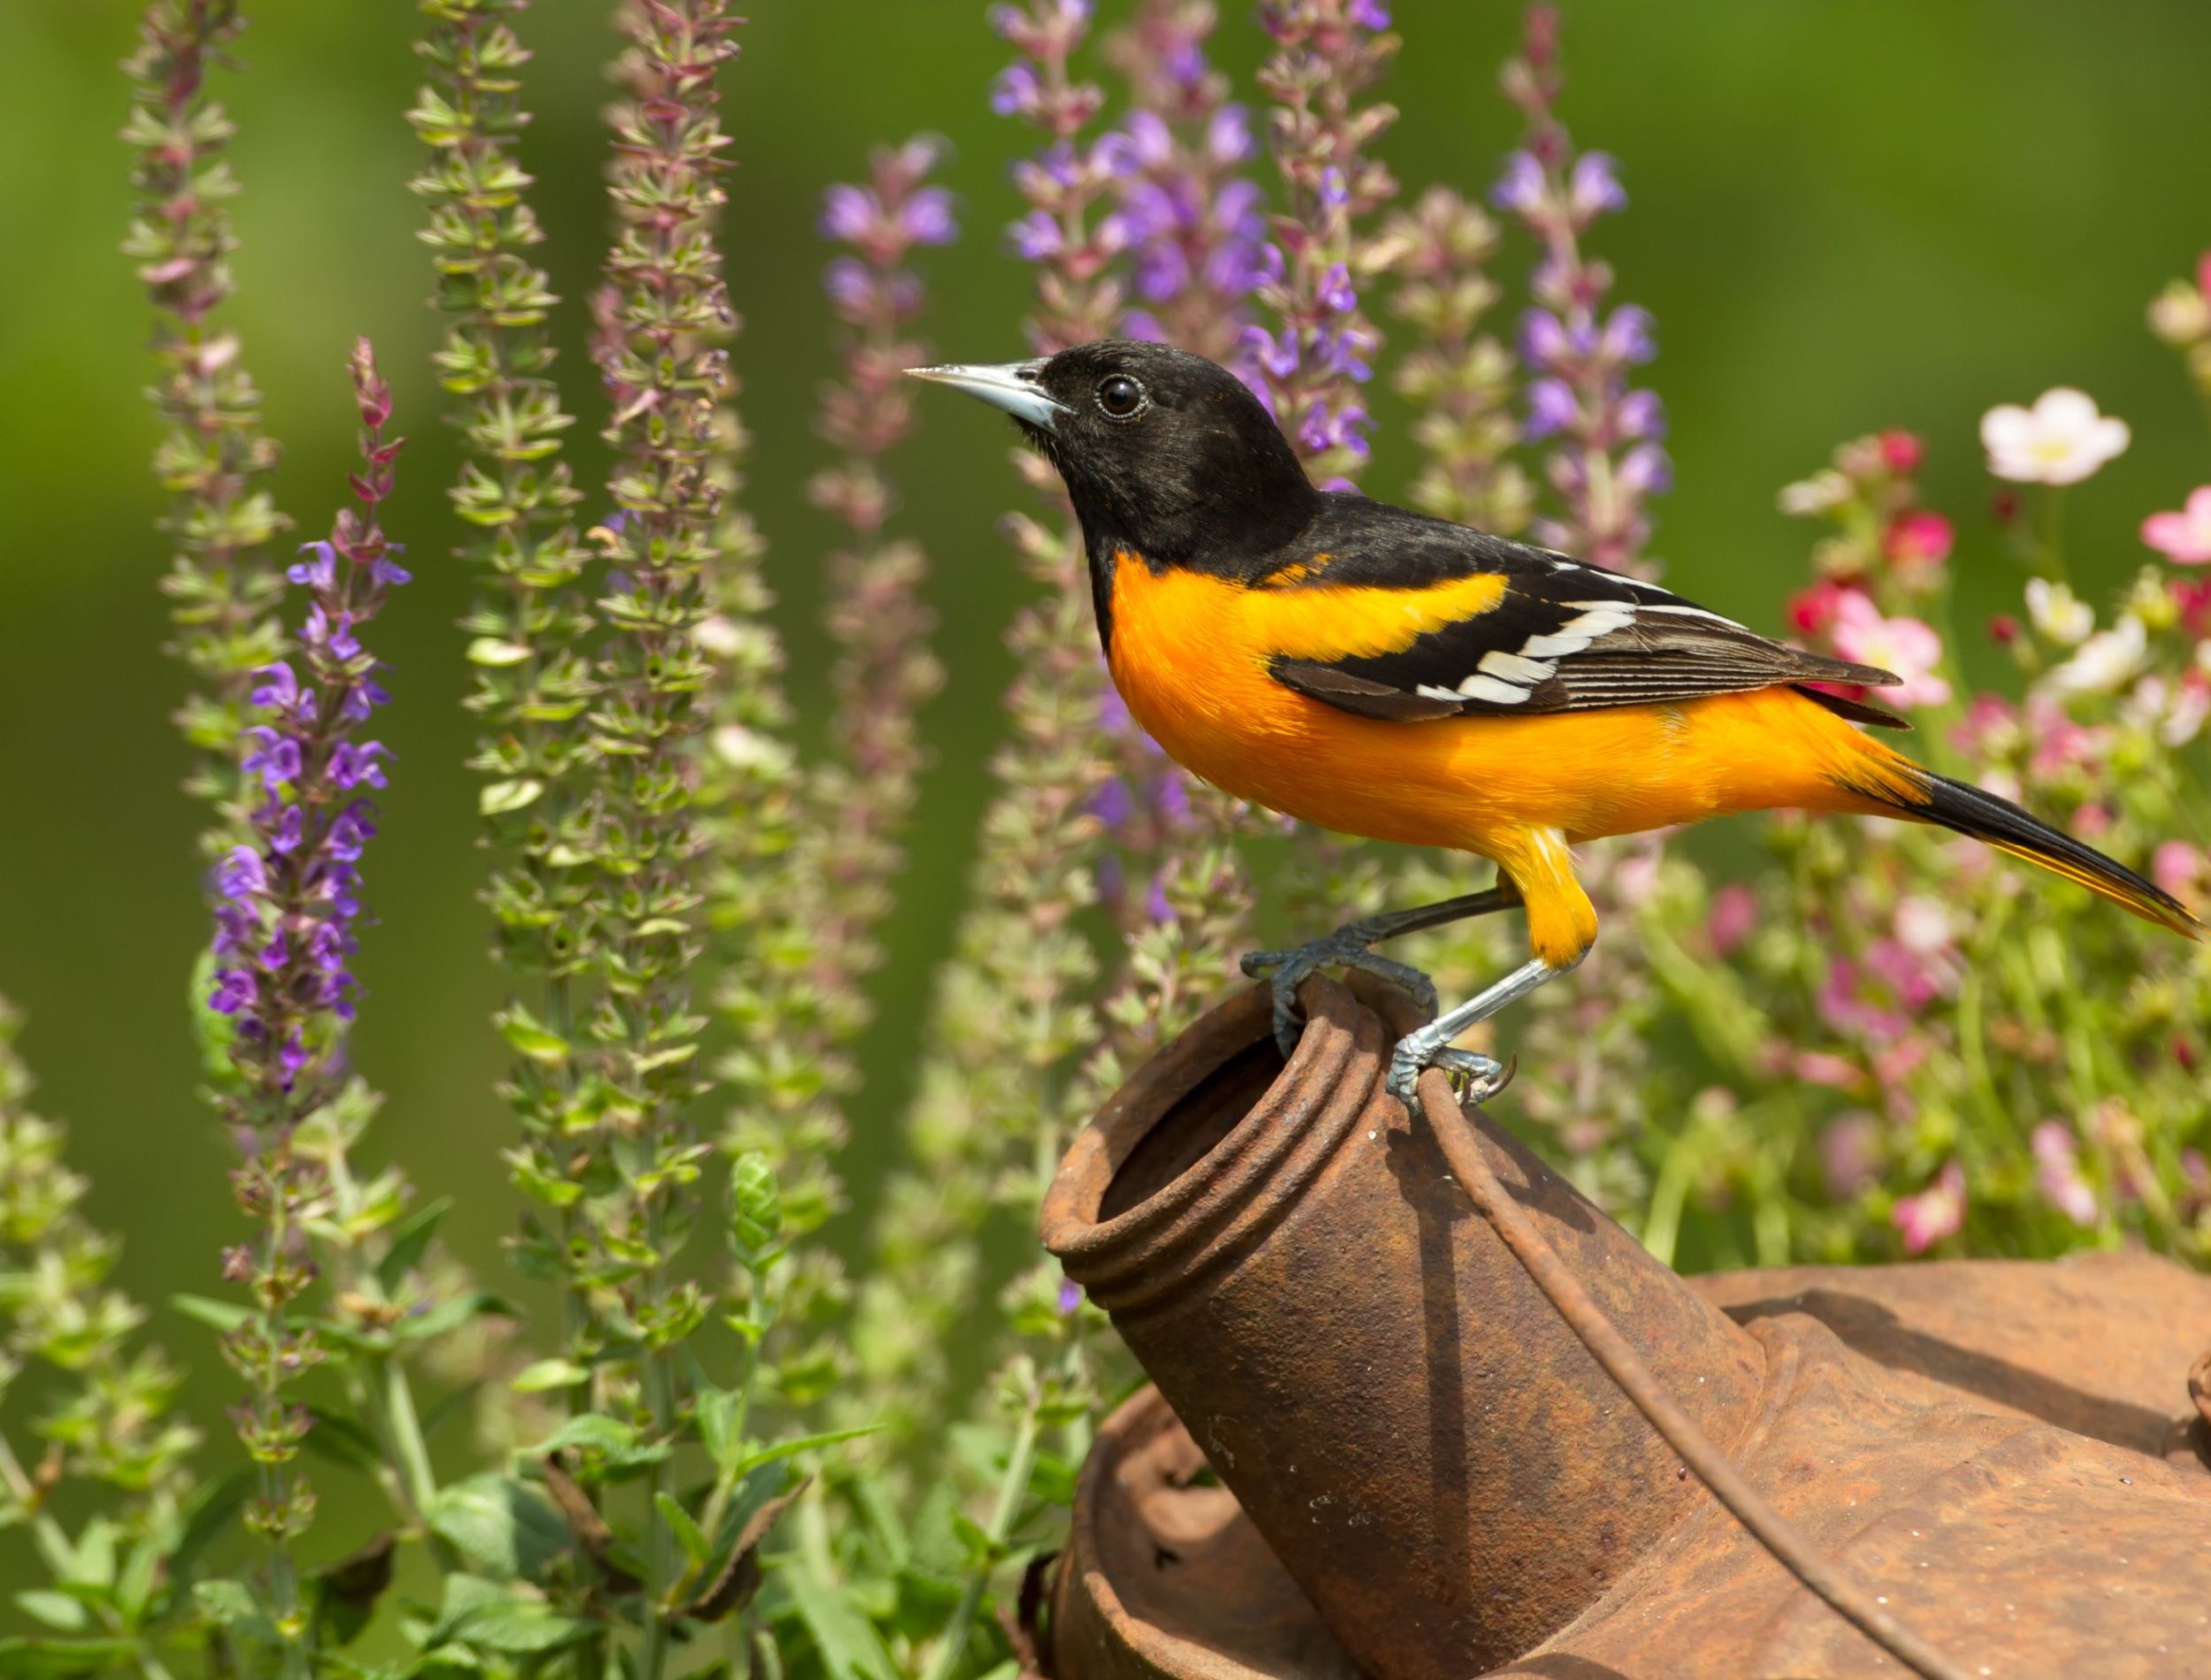 Baltimore Oriole perching on a rusty watering can in the garden